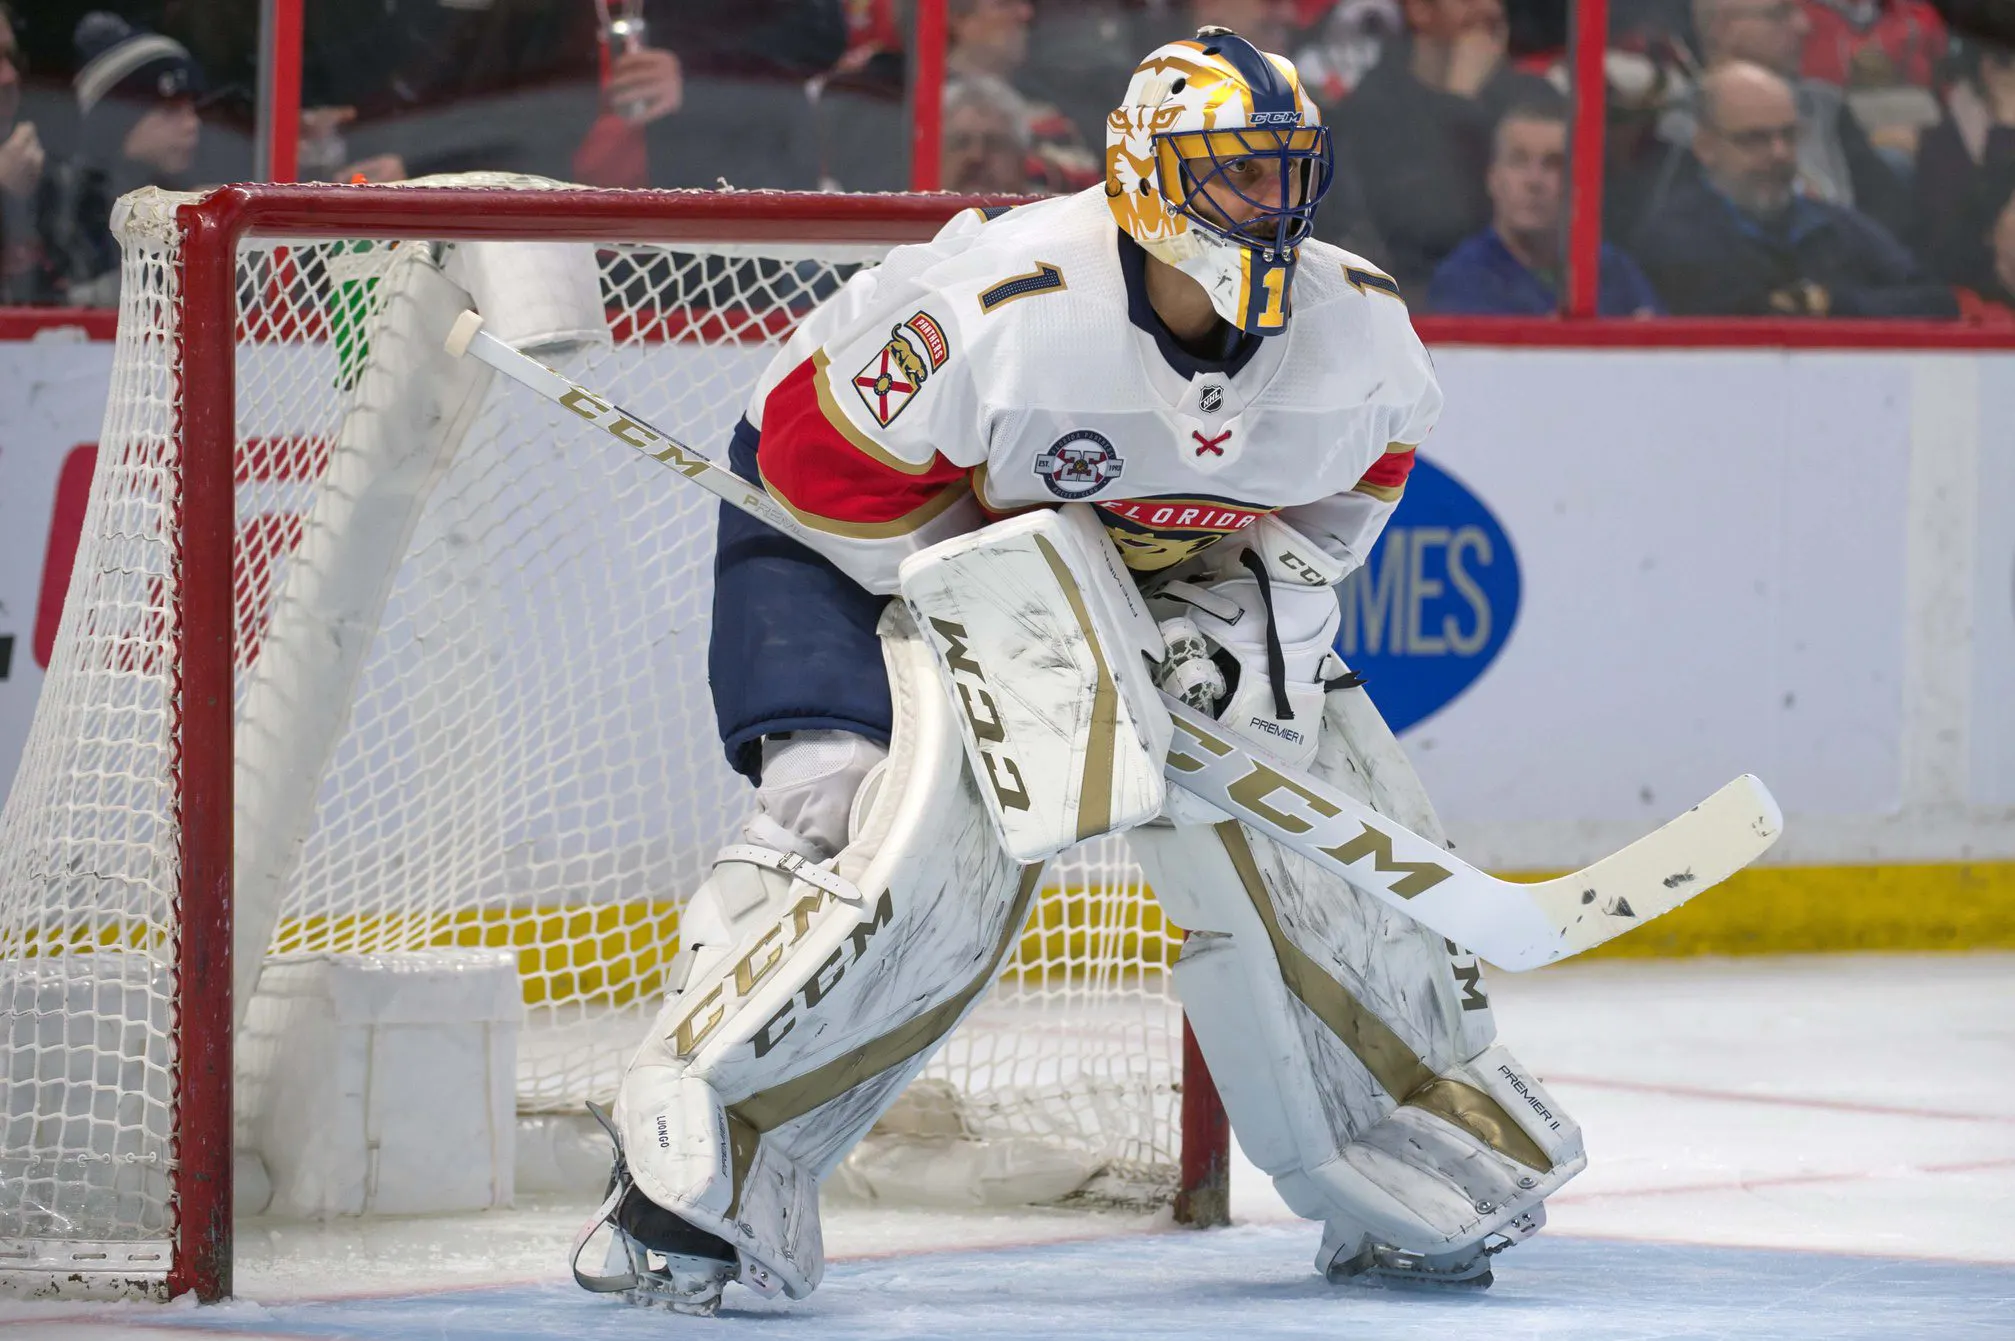 Roberto Luongo to participate in 2023 NHL All-Star Skills next month in Florida